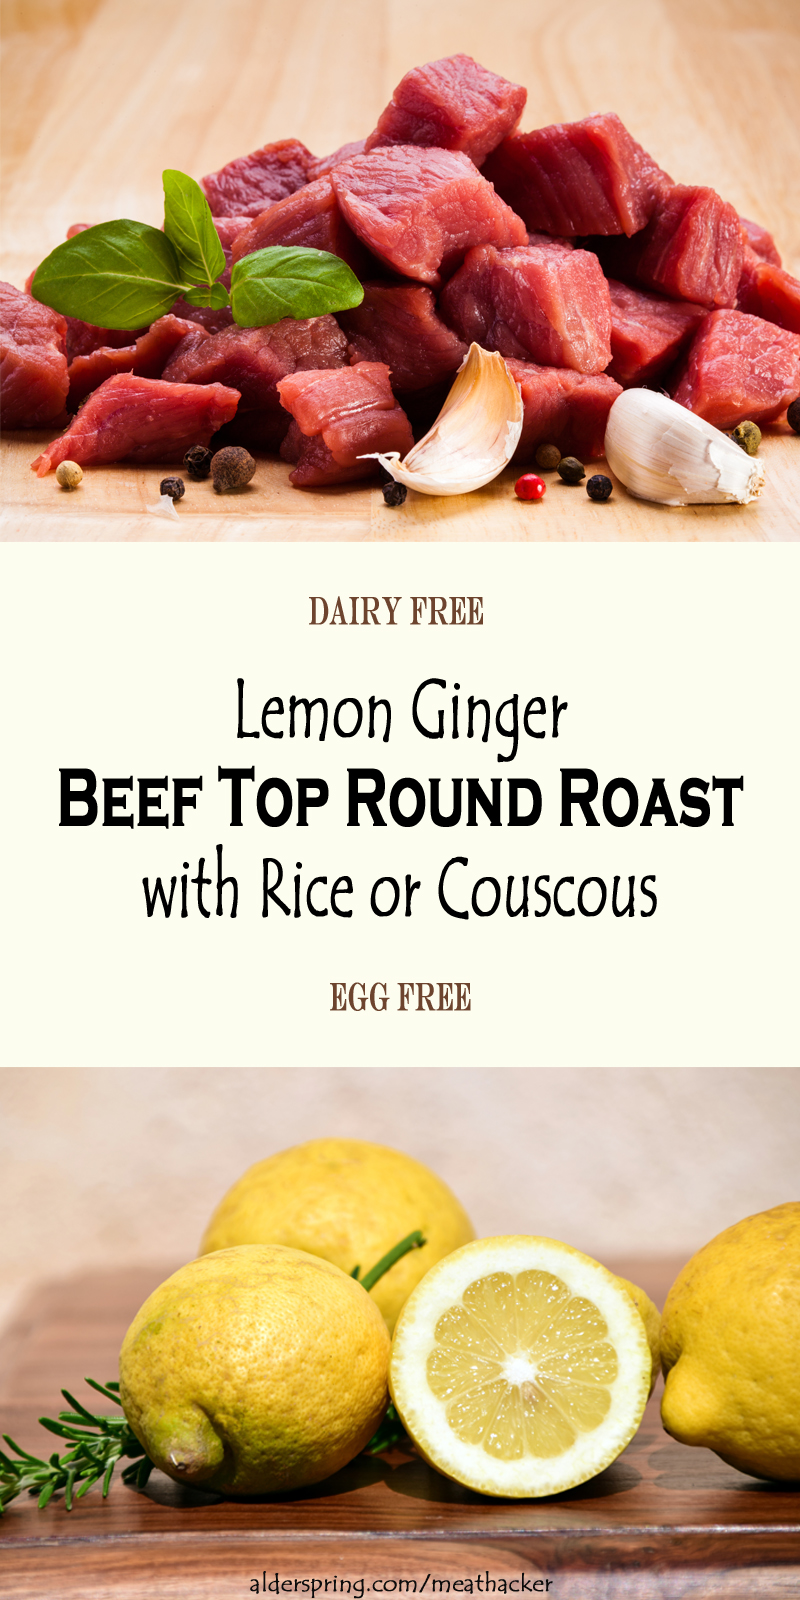 Lemon Ginger Beef Top Round Roast with Rice or Couscous